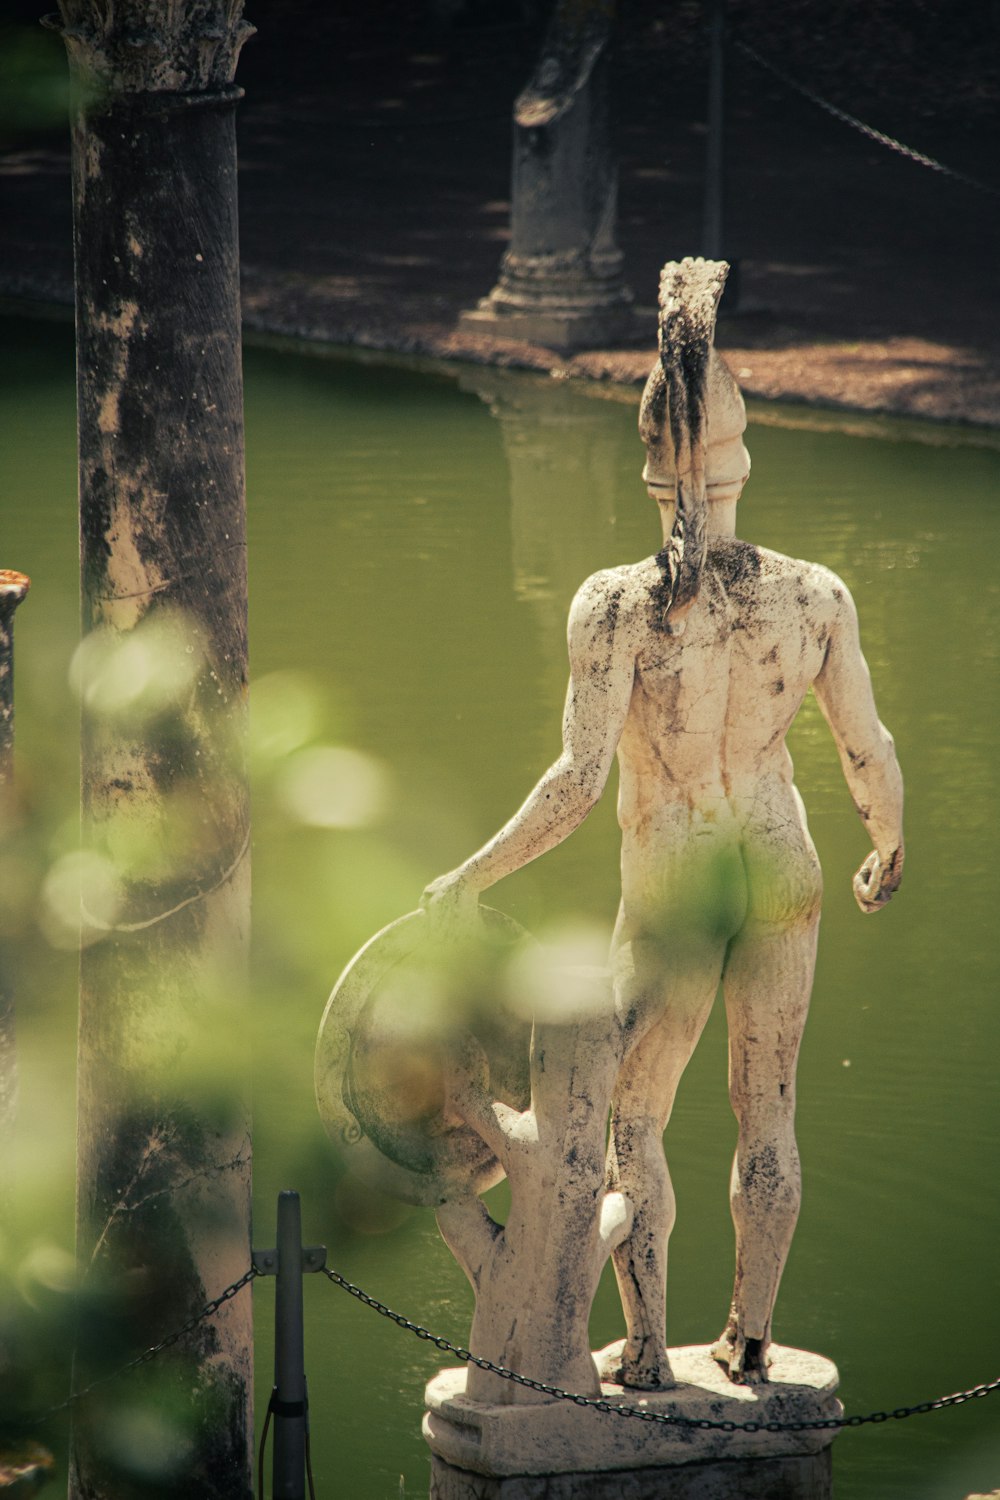 a statue of a man standing next to a body of water